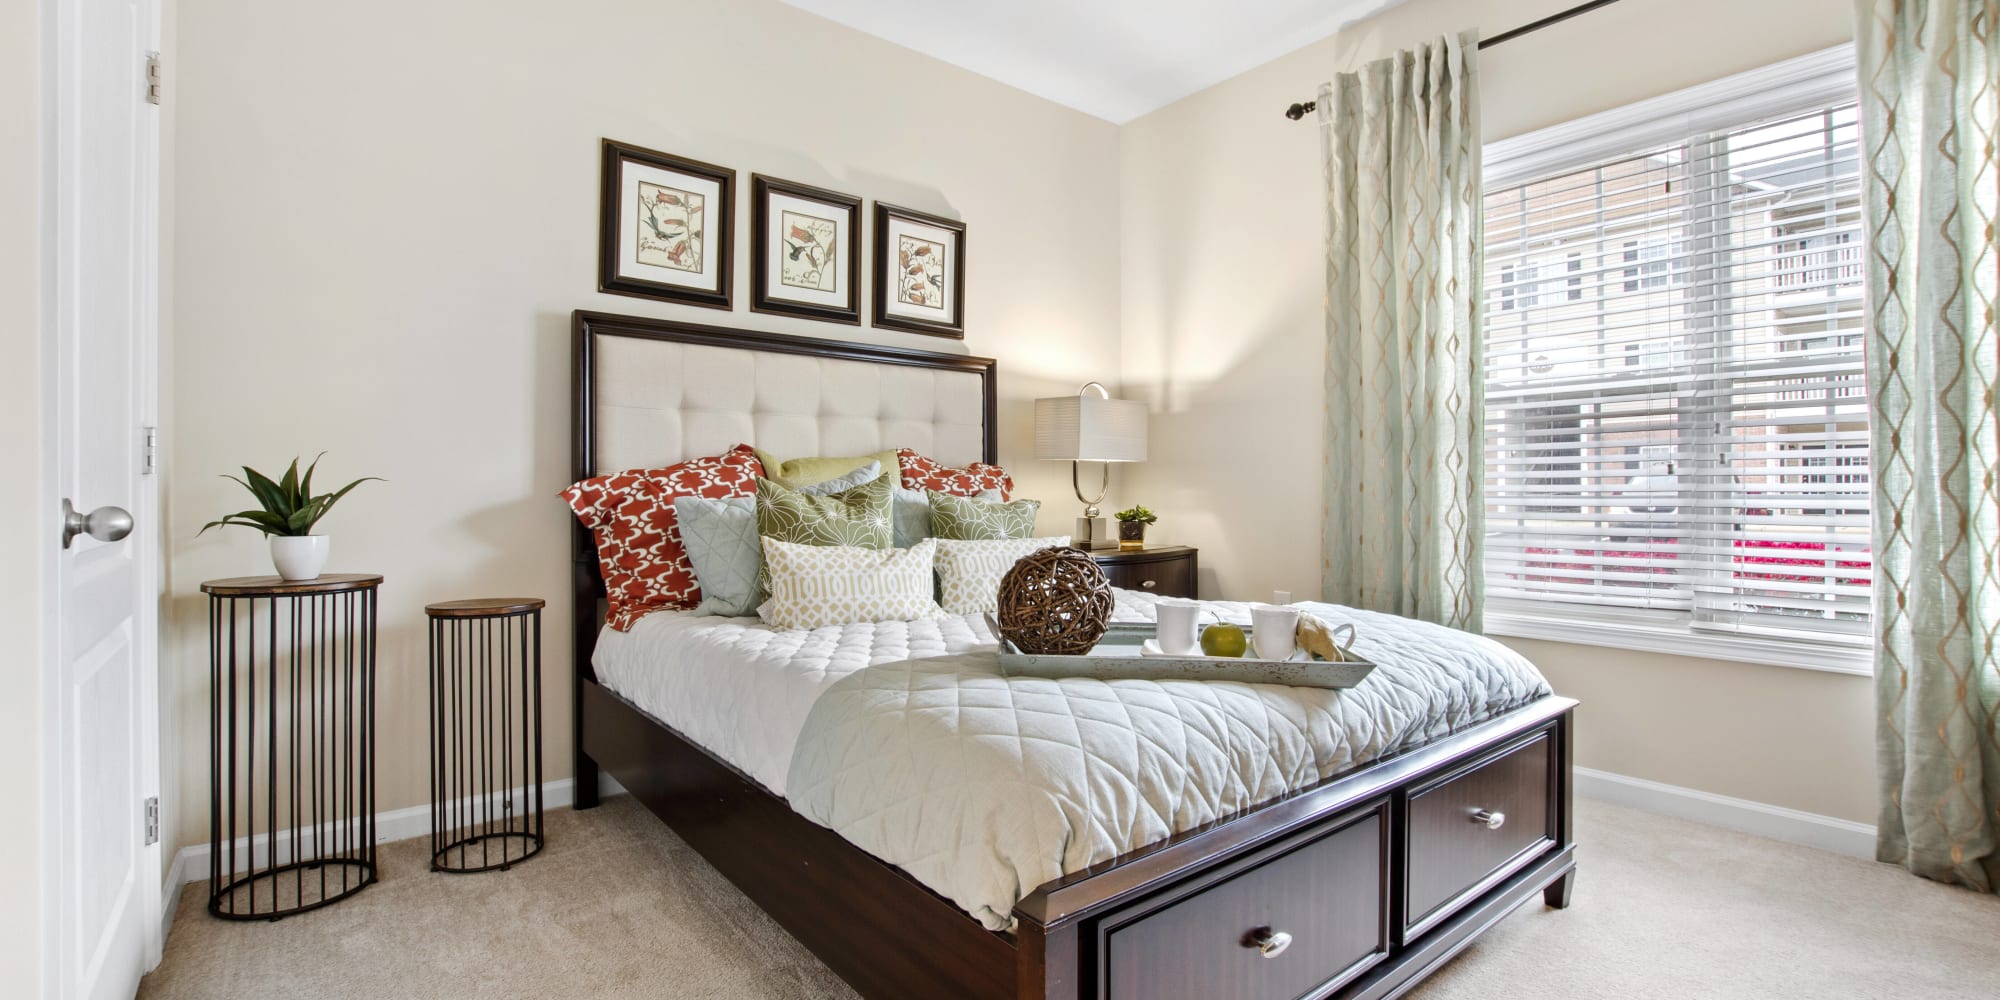 Well-decorated model bedroom with wood accents at Olympus at Jack Britt in Fayetteville, North Carolina